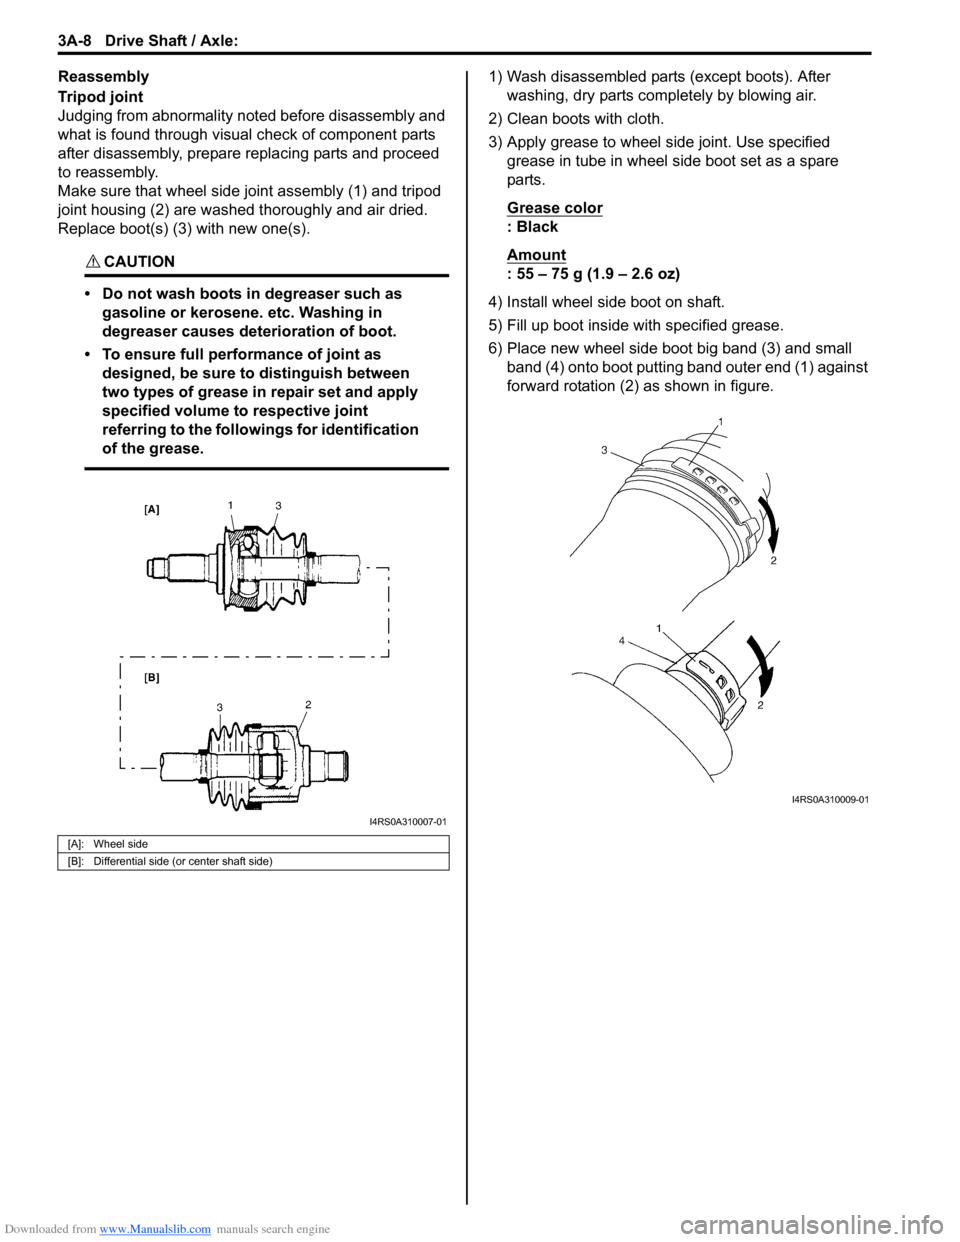 SUZUKI SWIFT 2008 2.G Service Workshop Manual Downloaded from www.Manualslib.com manuals search engine 3A-8 Drive Shaft / Axle: 
Reassembly
Tripod joint
Judging from abnormality noted before disassembly and 
what is found through visual check of 